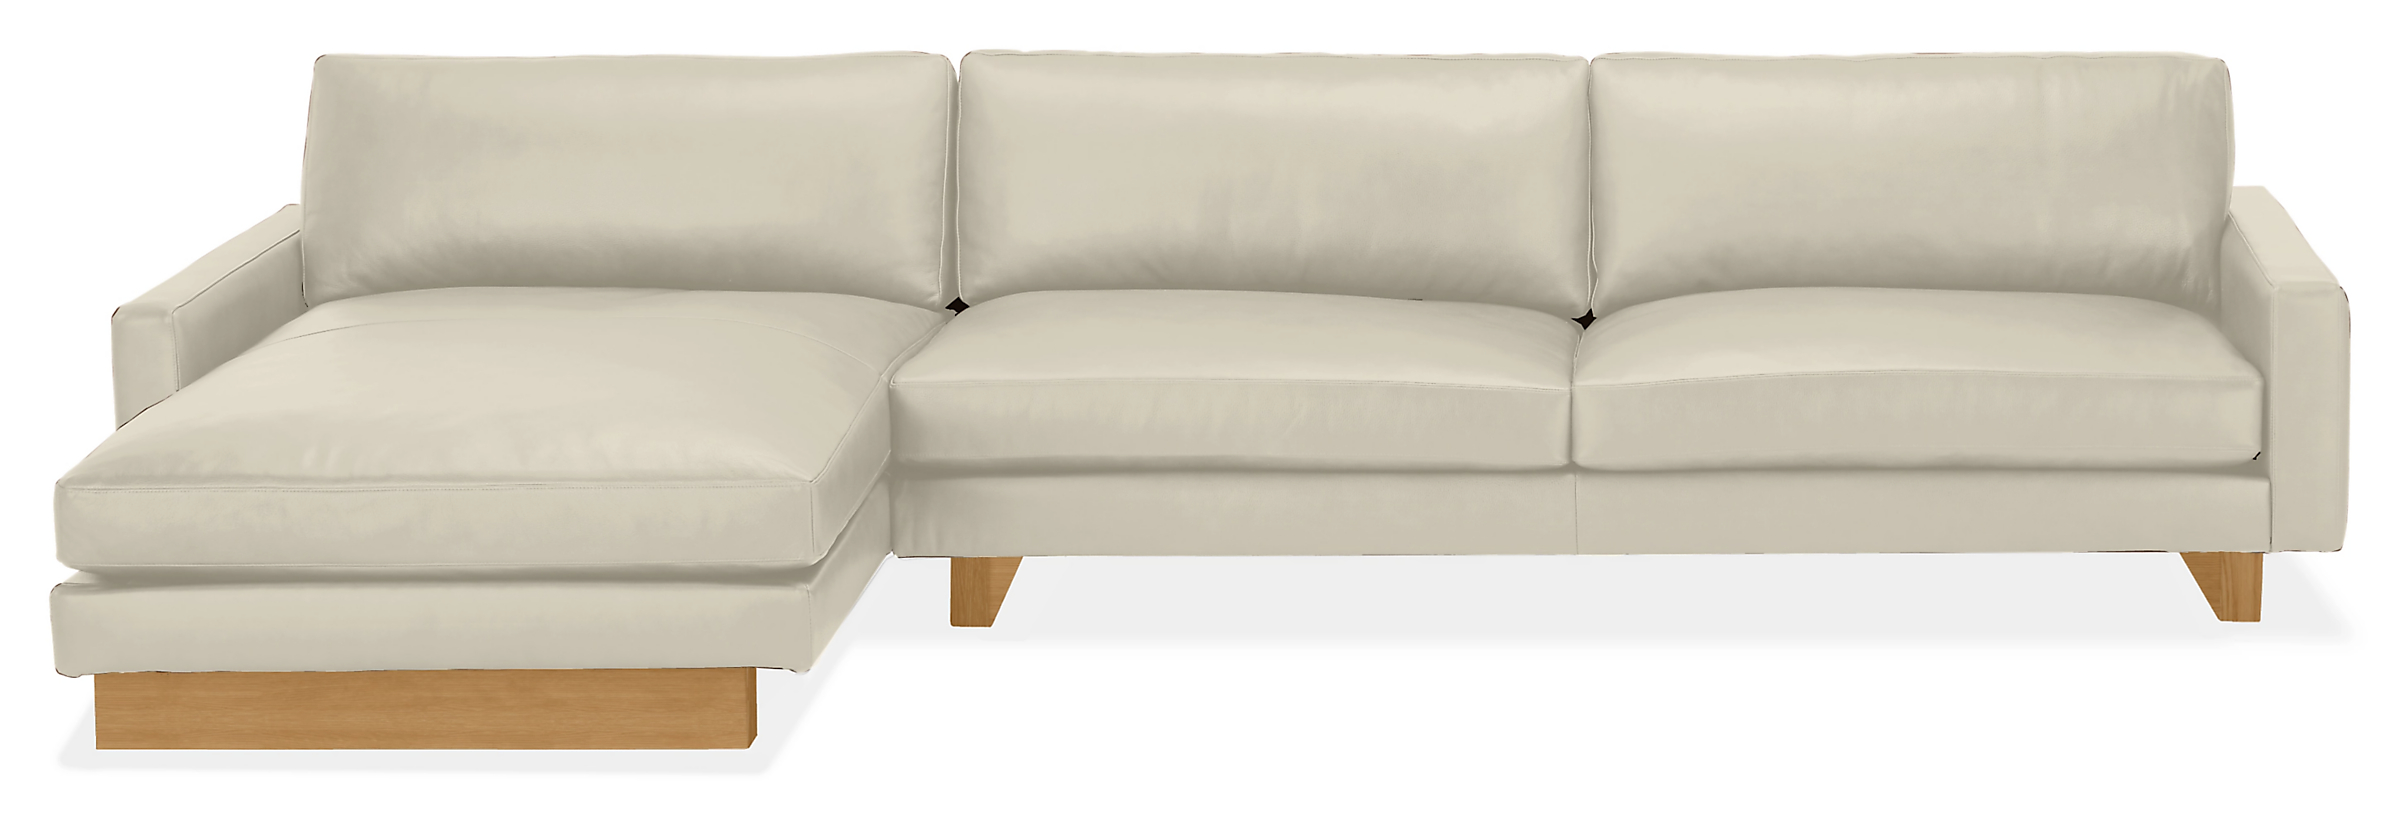 Pierson 129" Sofa w/Left-Arm Chaise in Vento Ivory Leather with White Oak